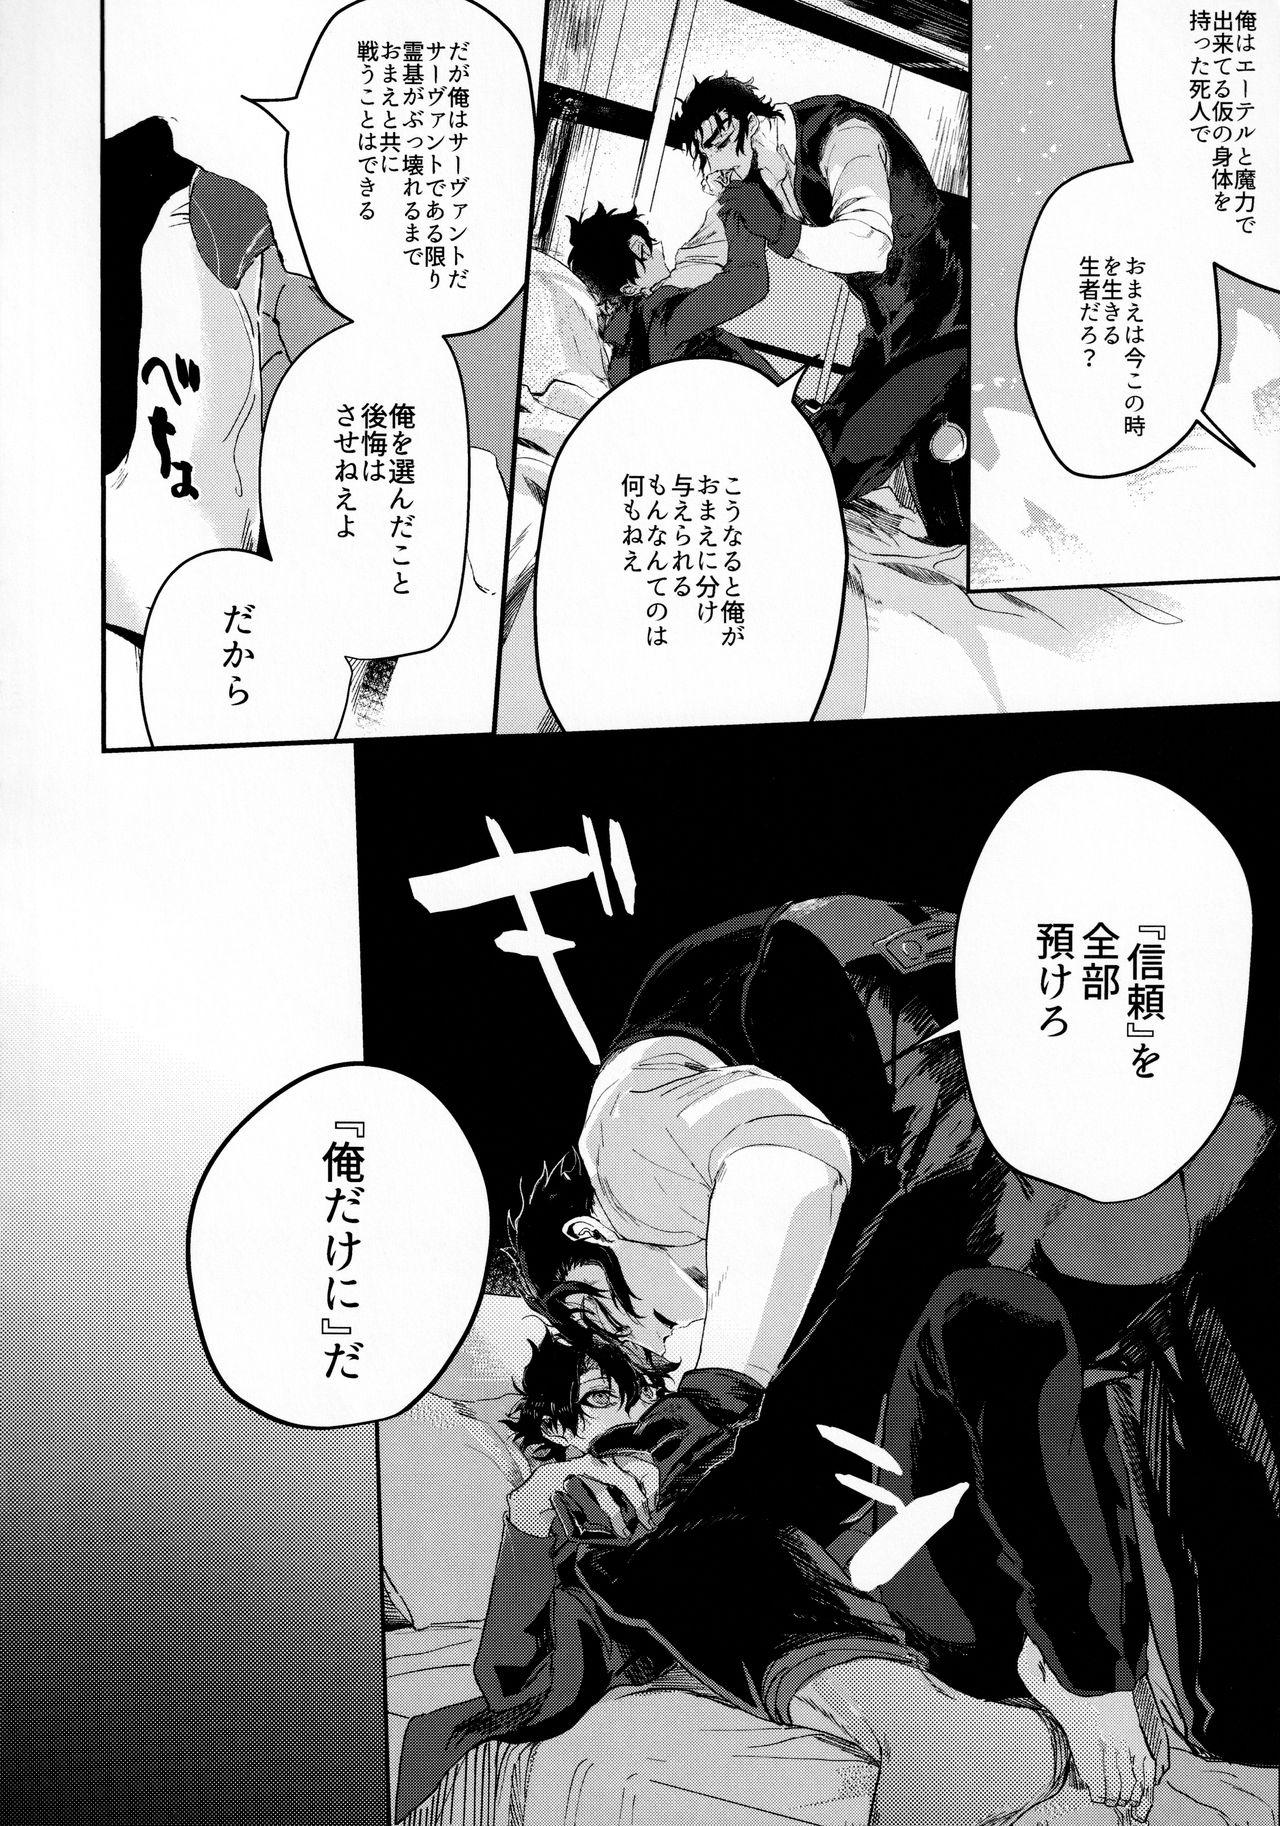 Massages 耽溺と熱 - Fate grand order Atm - Page 11